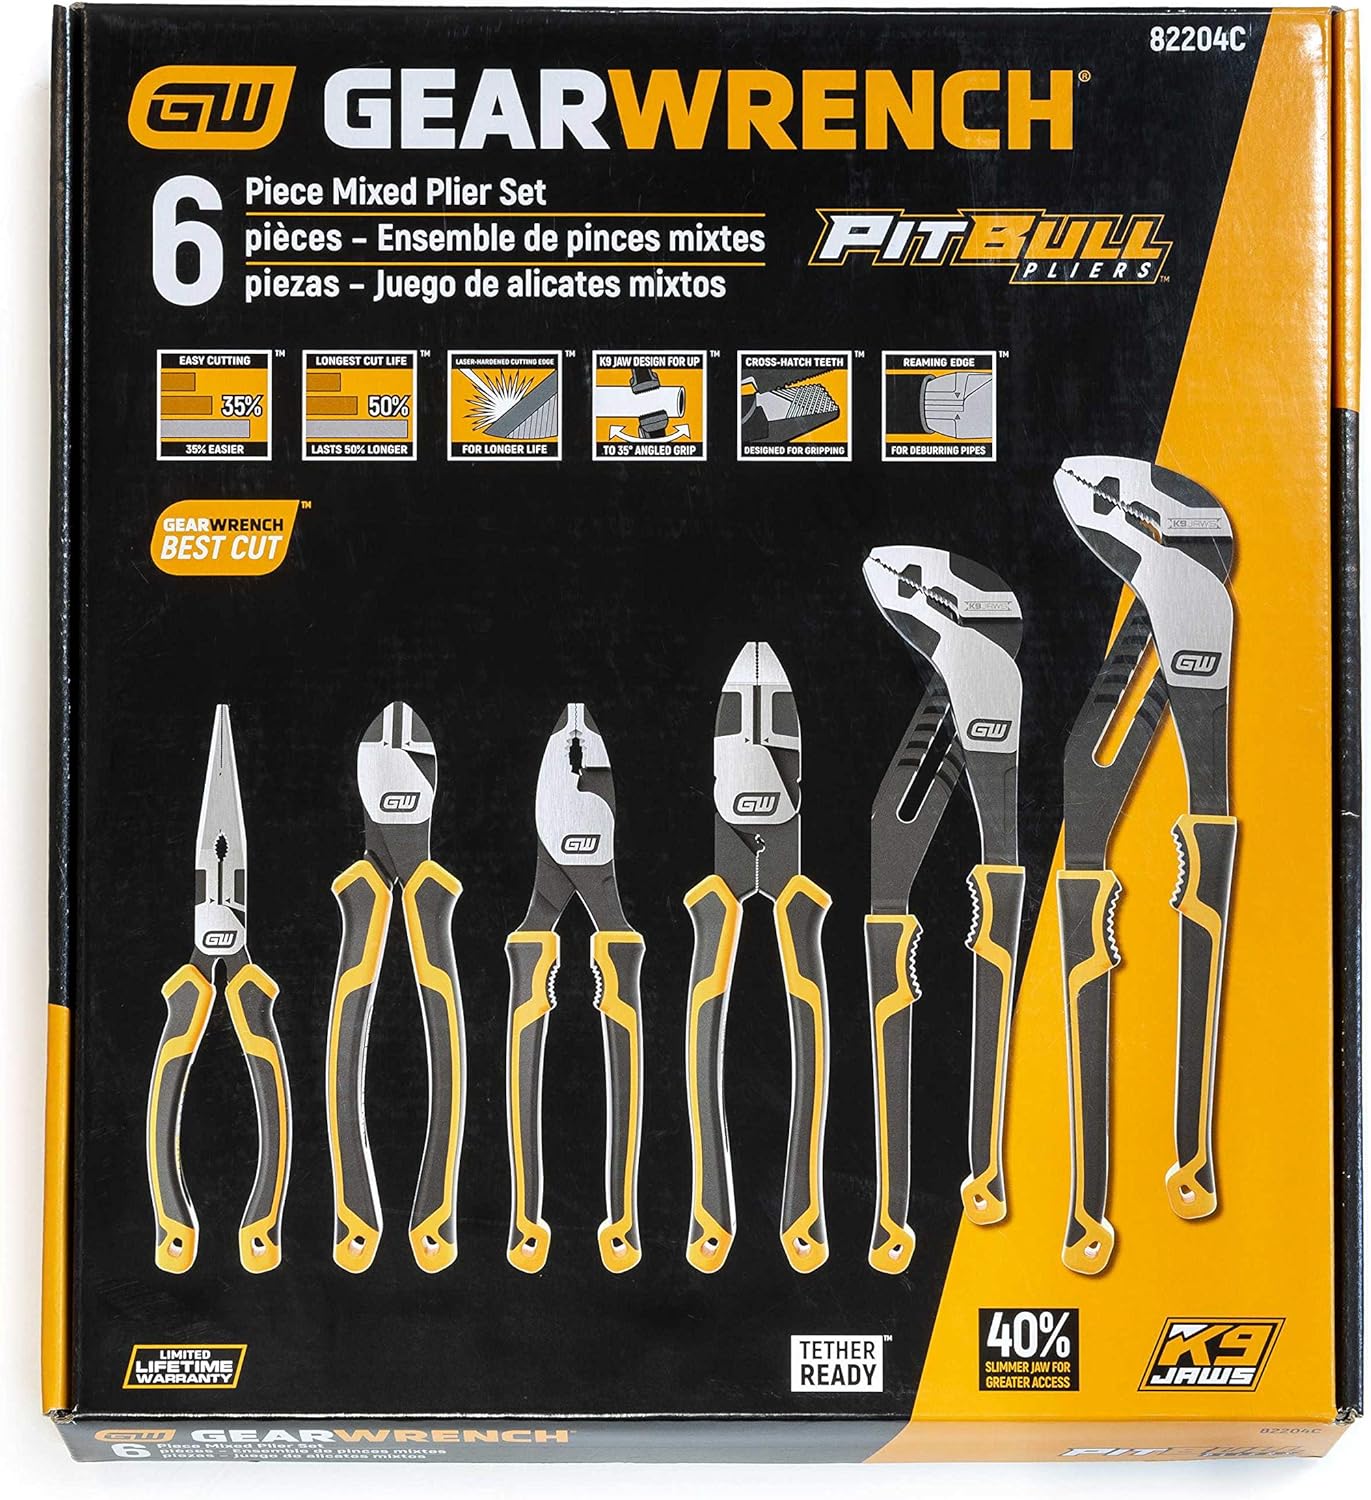 GEARWRENCH 6 Pc. Pitbull Dual Material Mixed Plier Set - 82204C $58.65